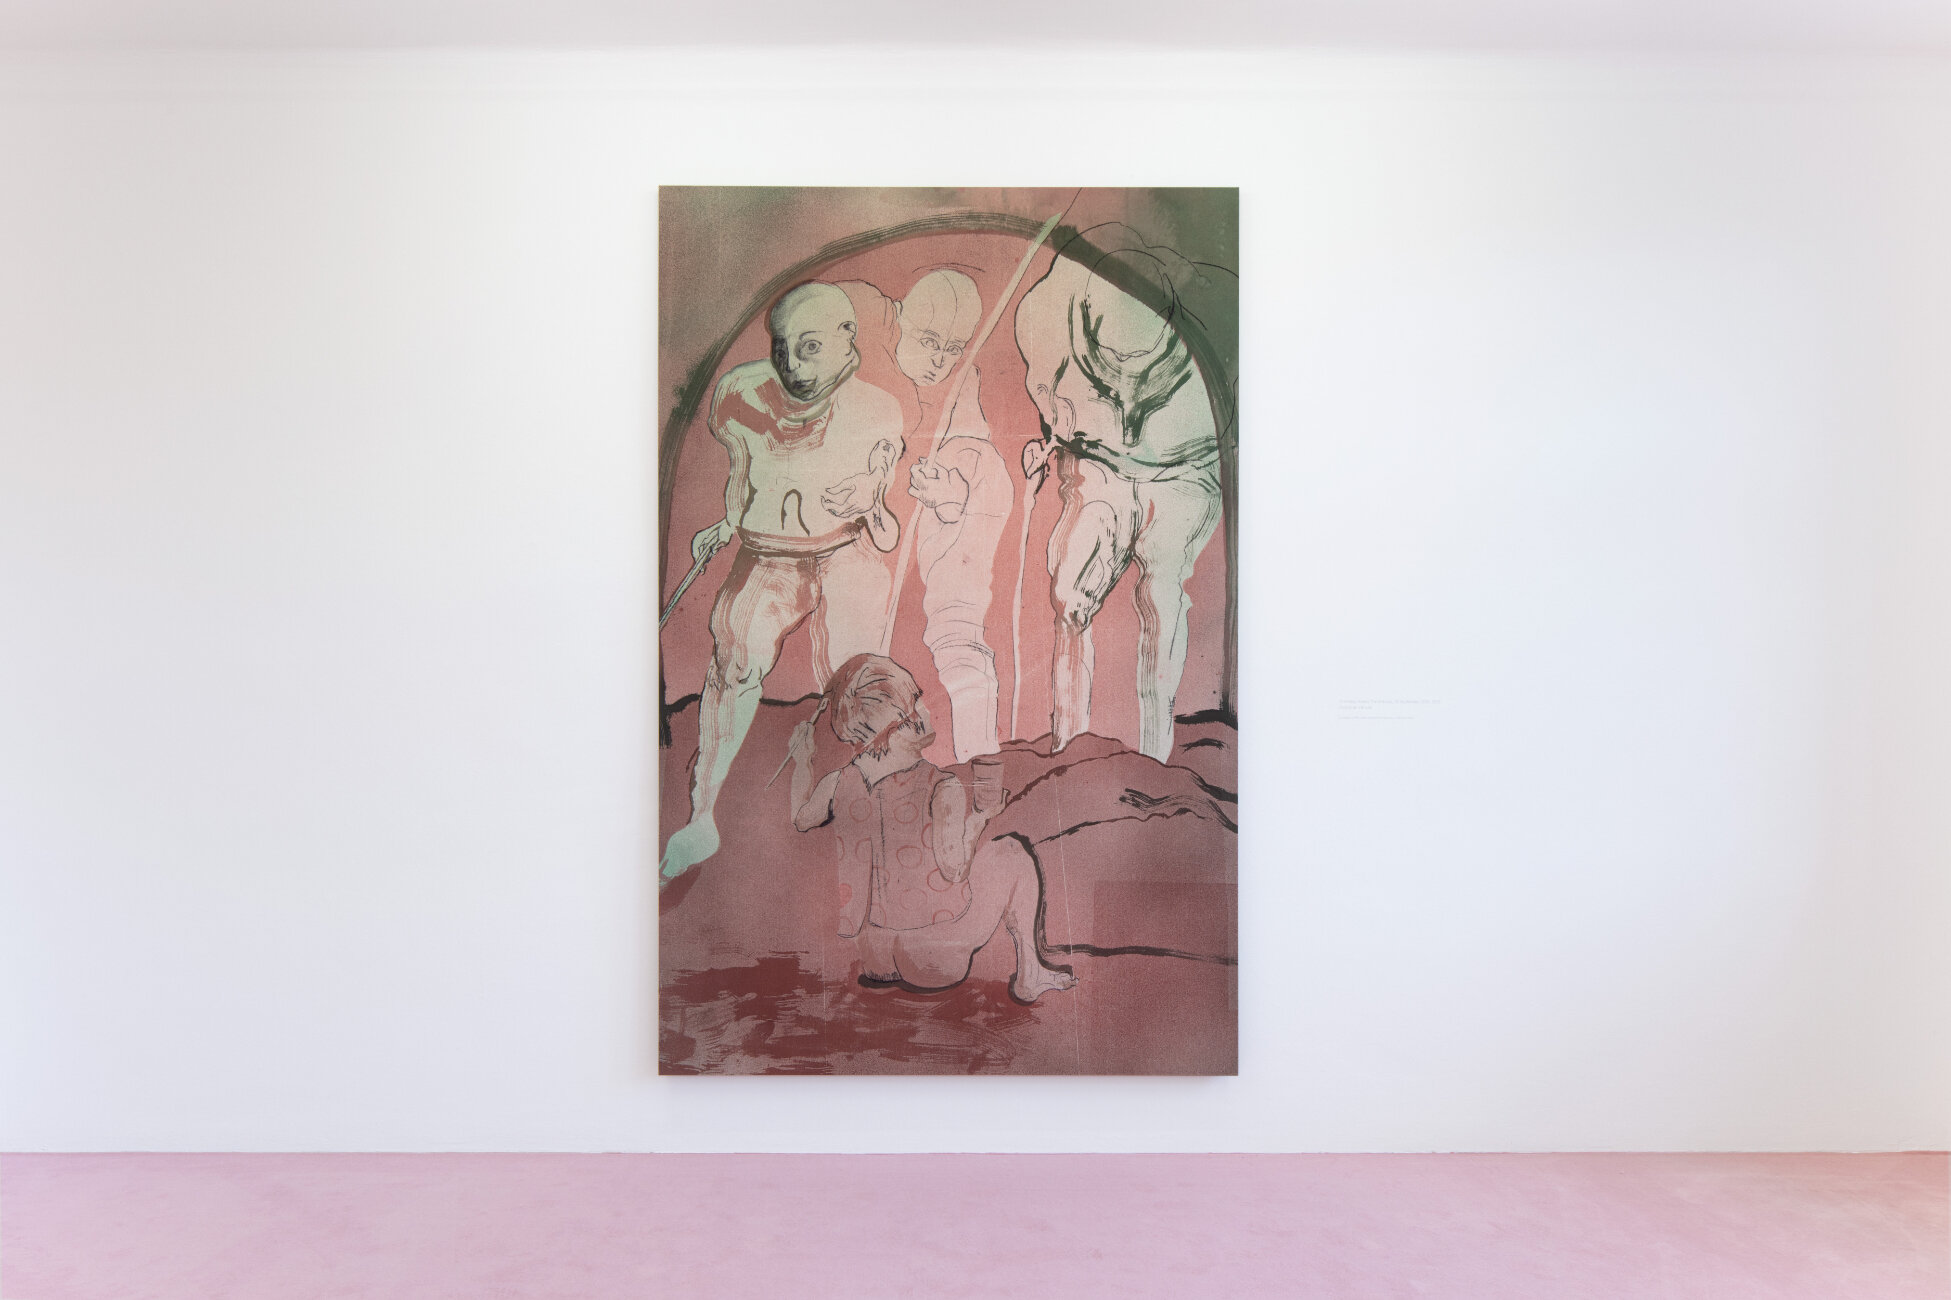  Installation view:  Matthew Lutz-Kinoy. Window to The Clouds ; Salon Berlin, Museum Frieder Burda Matthew Lutz-Kinoy,  Thunberg Greets The Nations , 23 September 2019, 2019. Acrylic on canvas, 260 x 170 cm.  Courtesy of the artist and Collection Mar